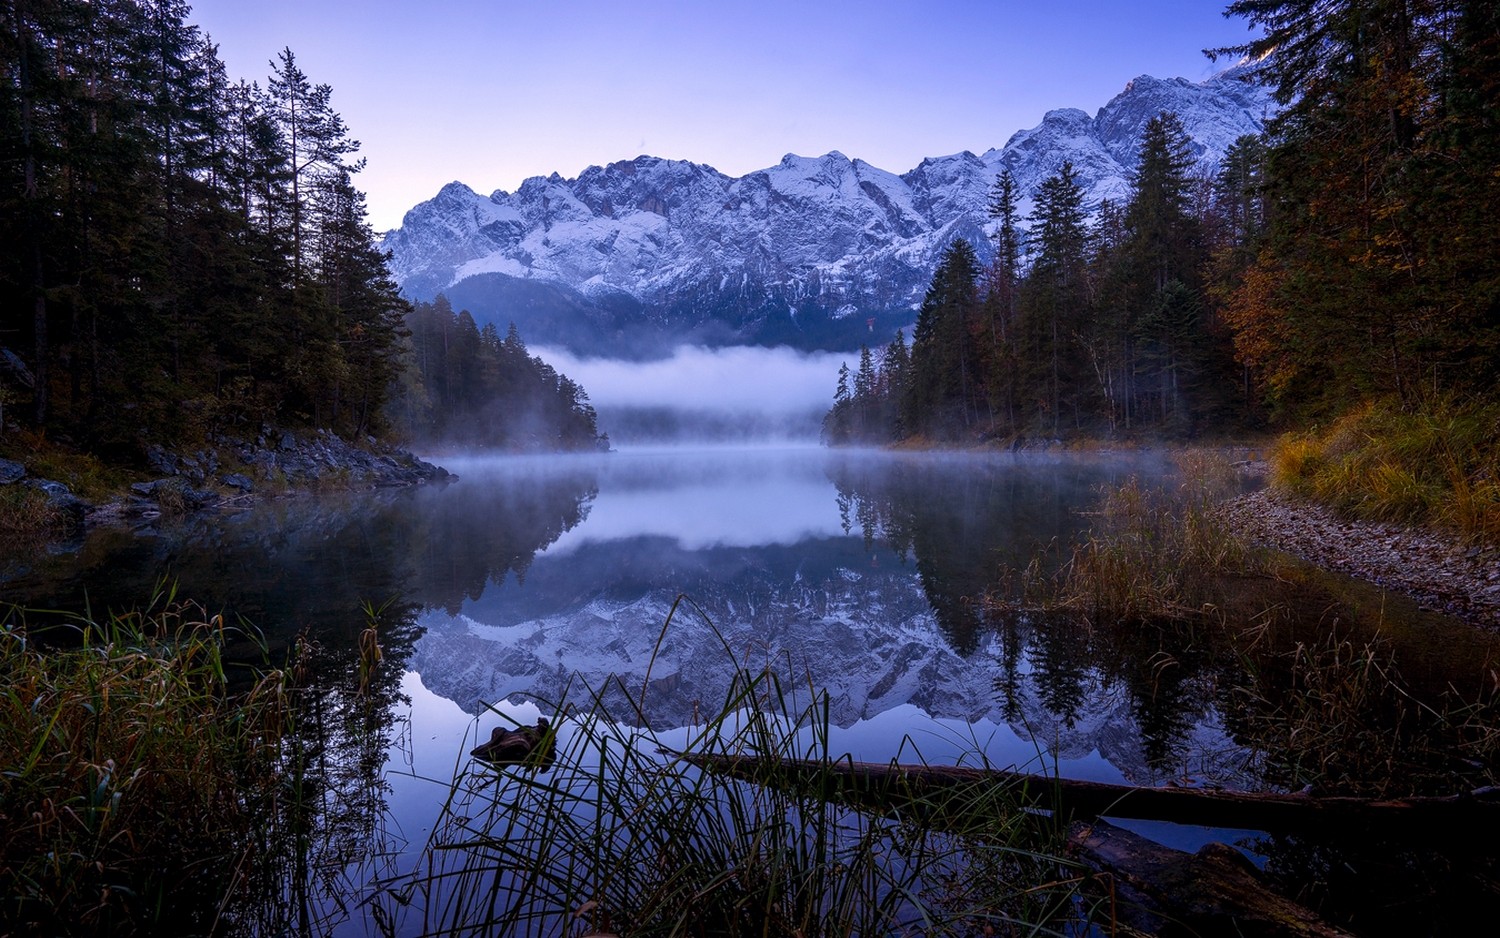 General 1500x938 nature landscape forest fall morning lake reflection mountains snowy peak trees shrubs Germany snowy mountain